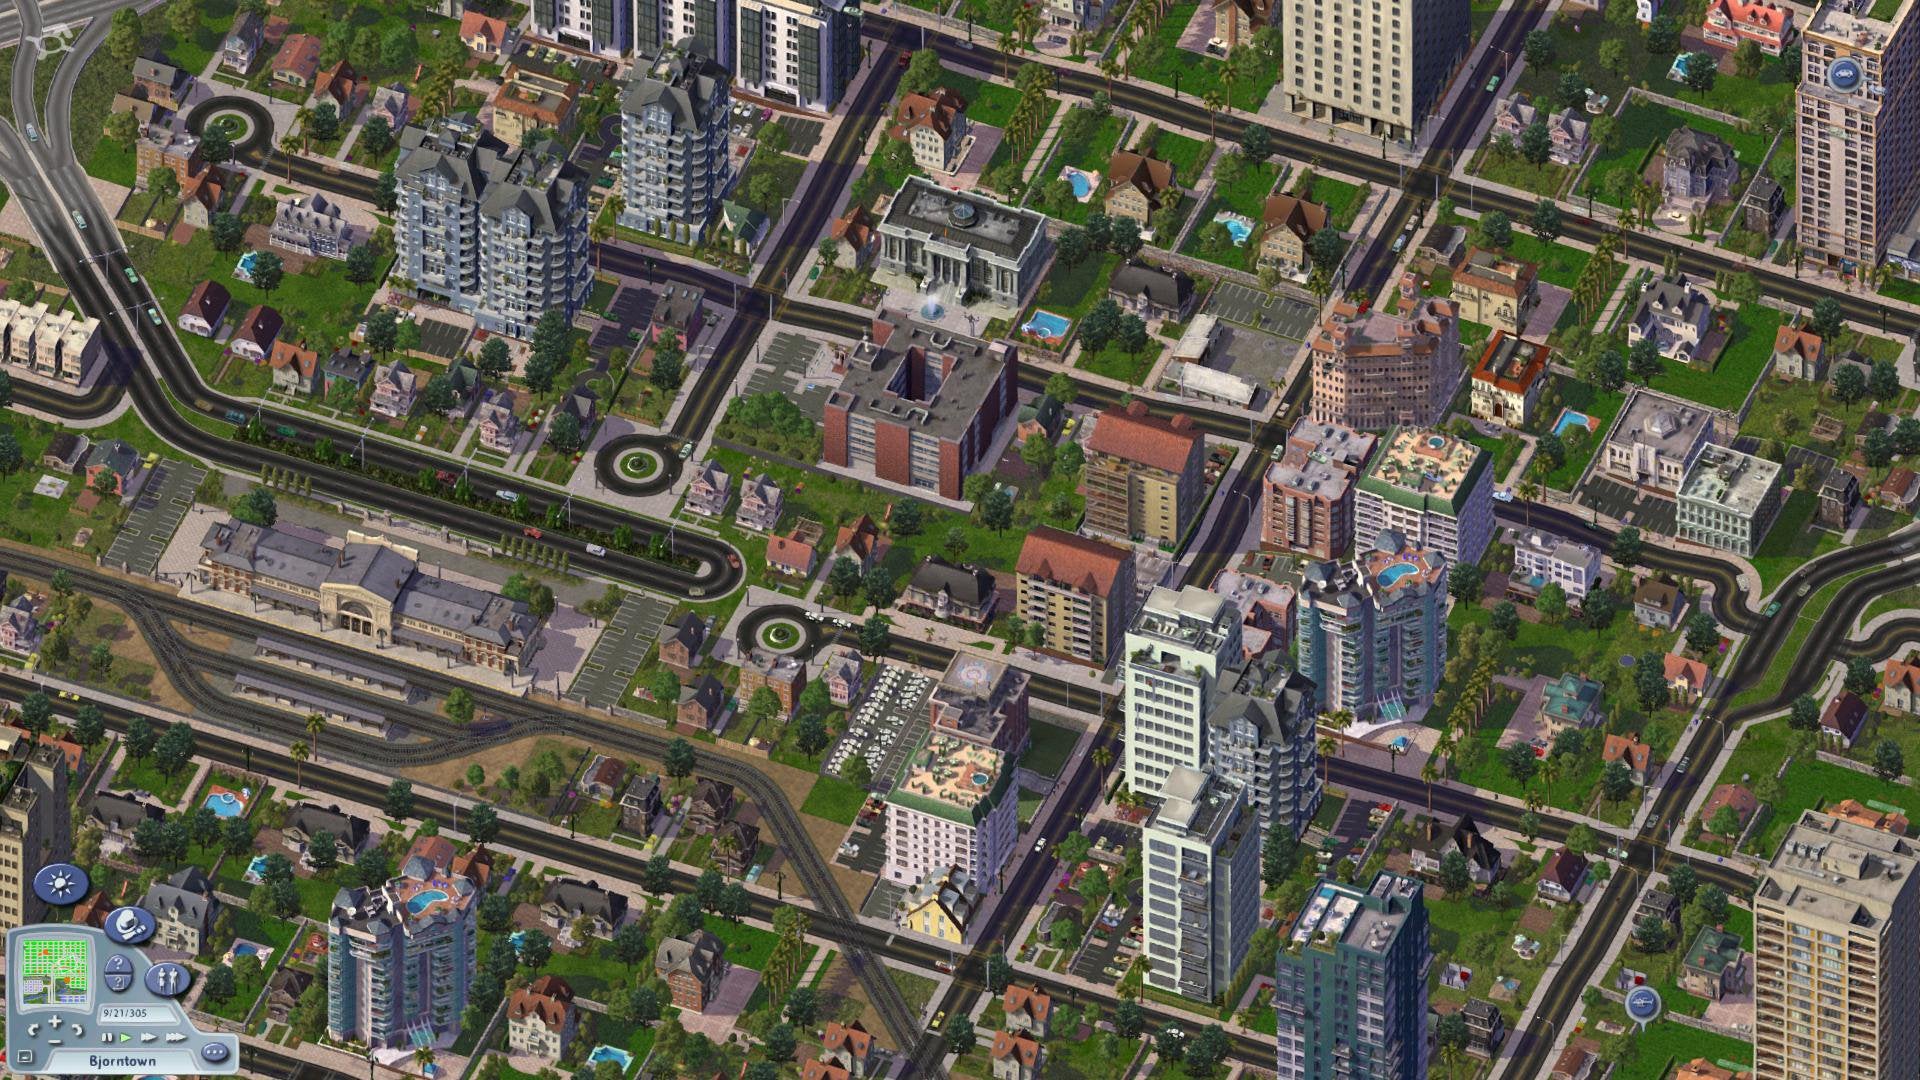 A few city streets in 2003's SimCity 4.